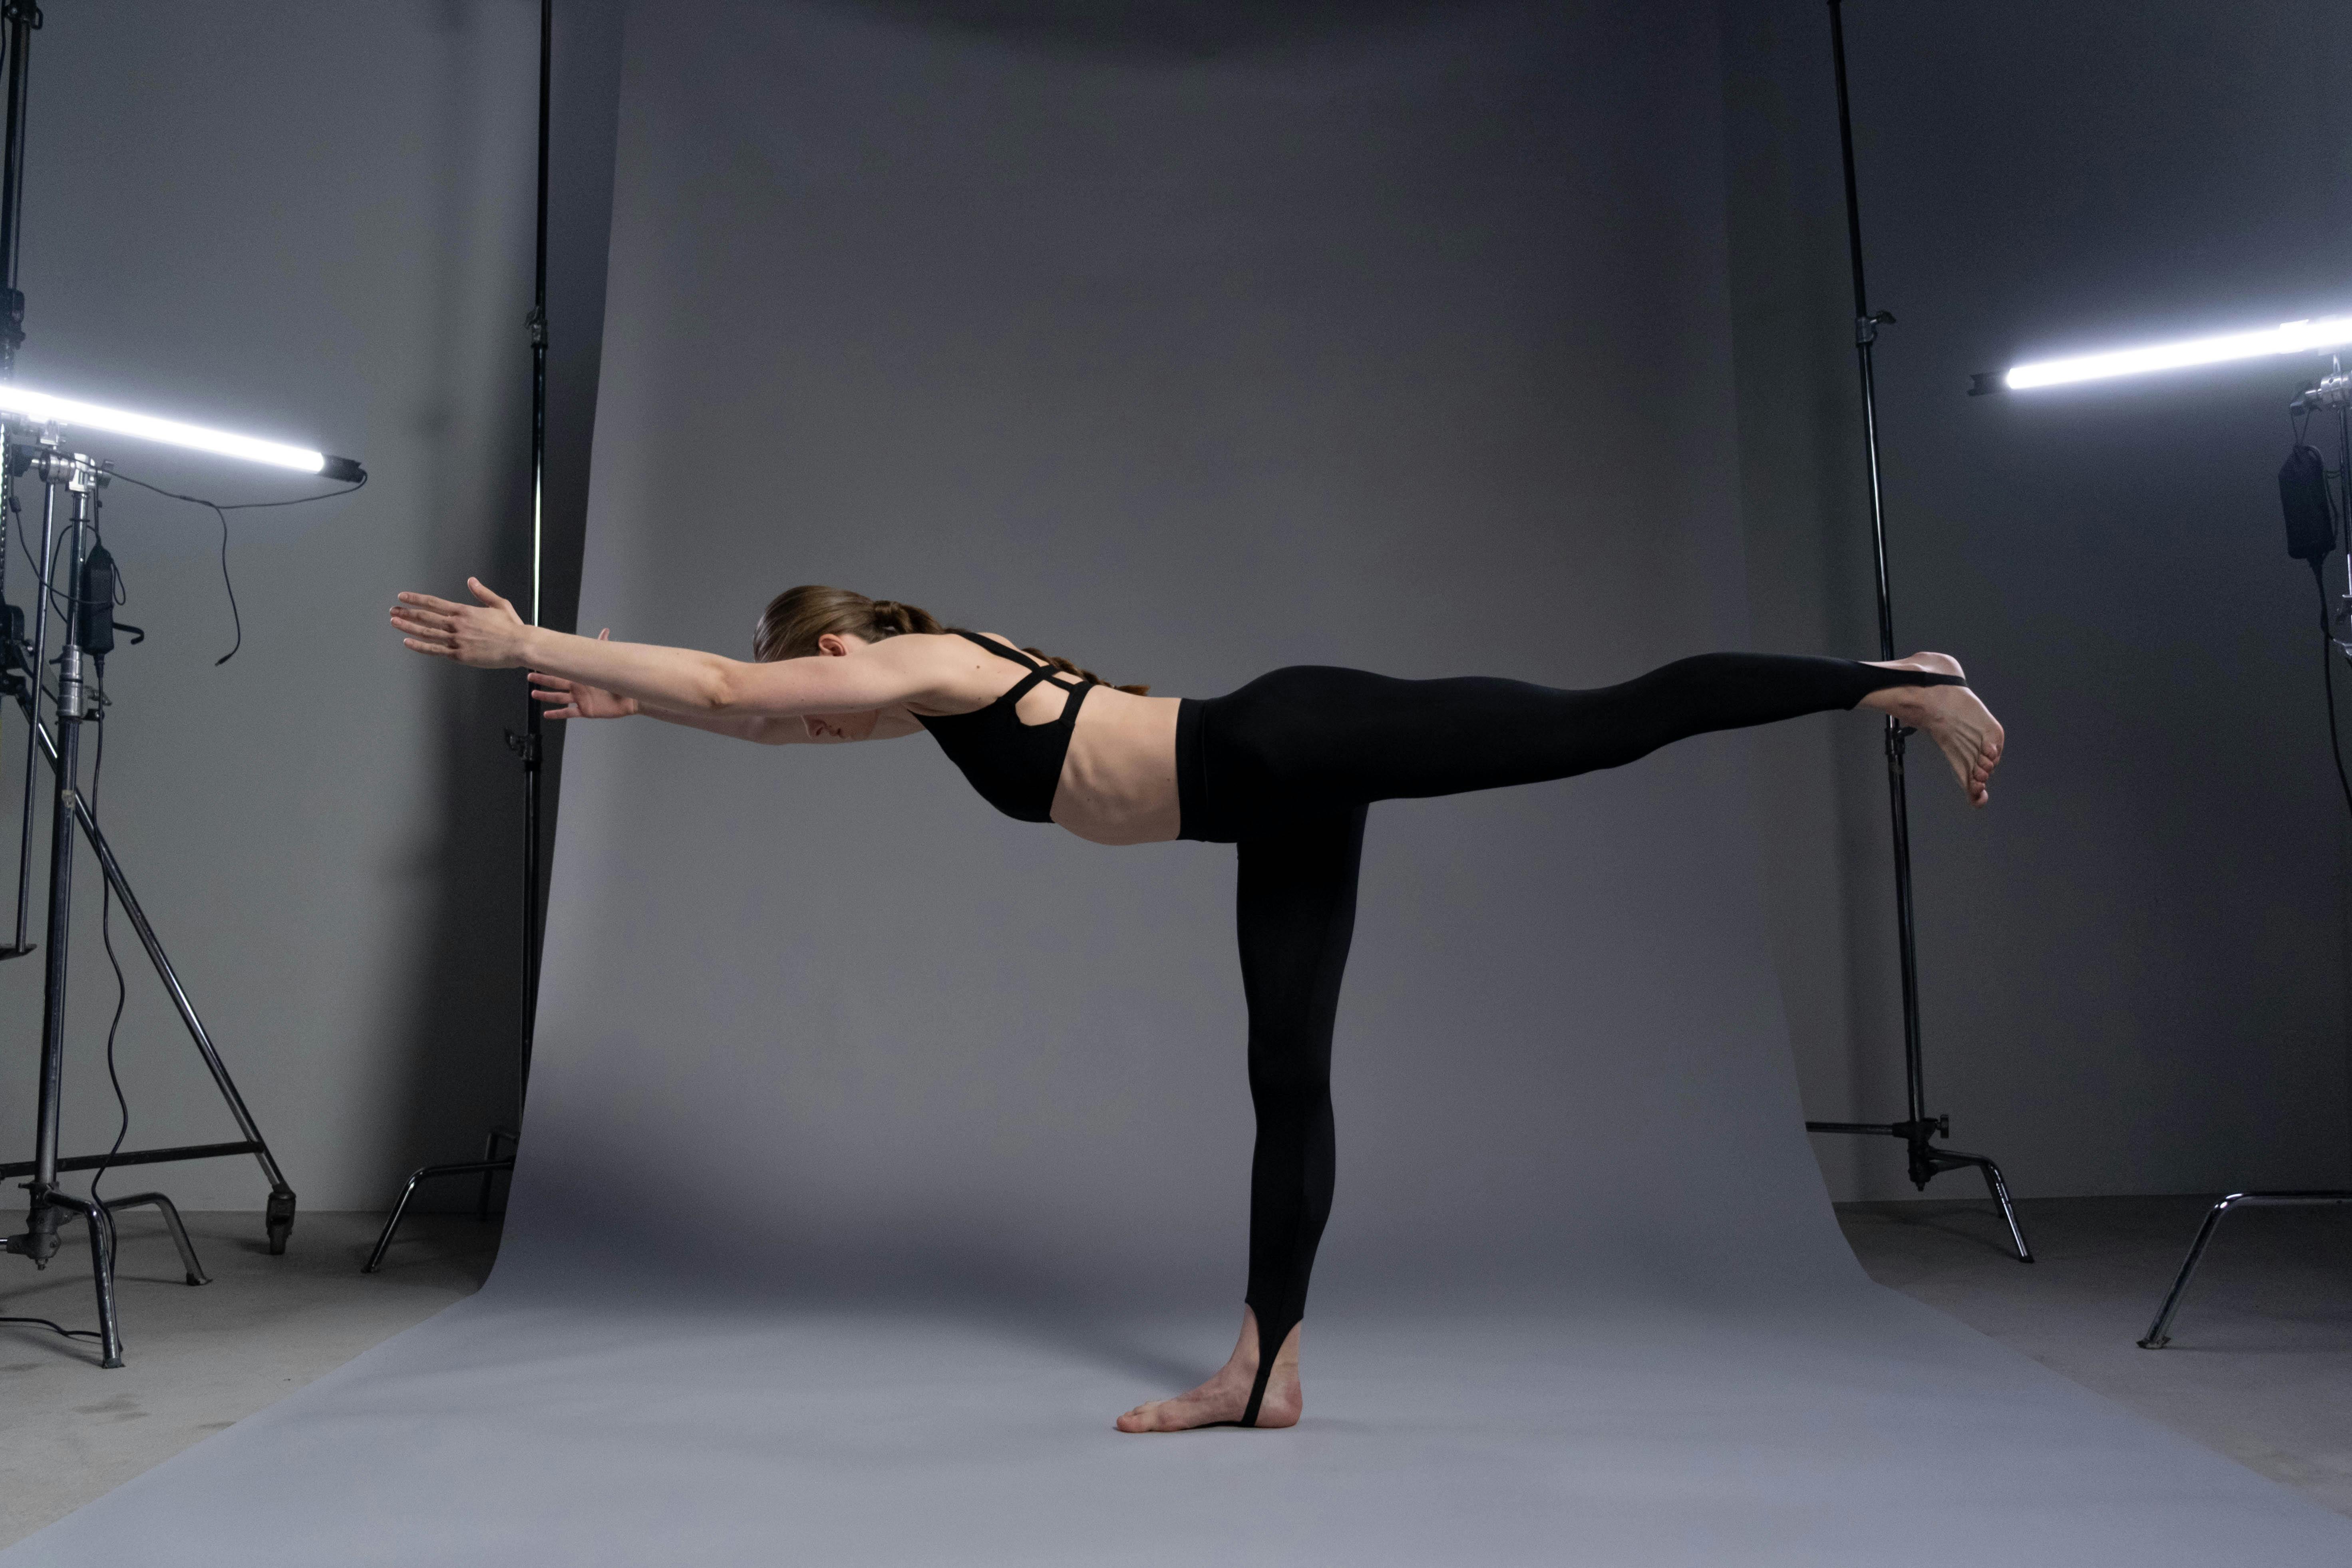 Woman Performs A One-Legged Standing Pose